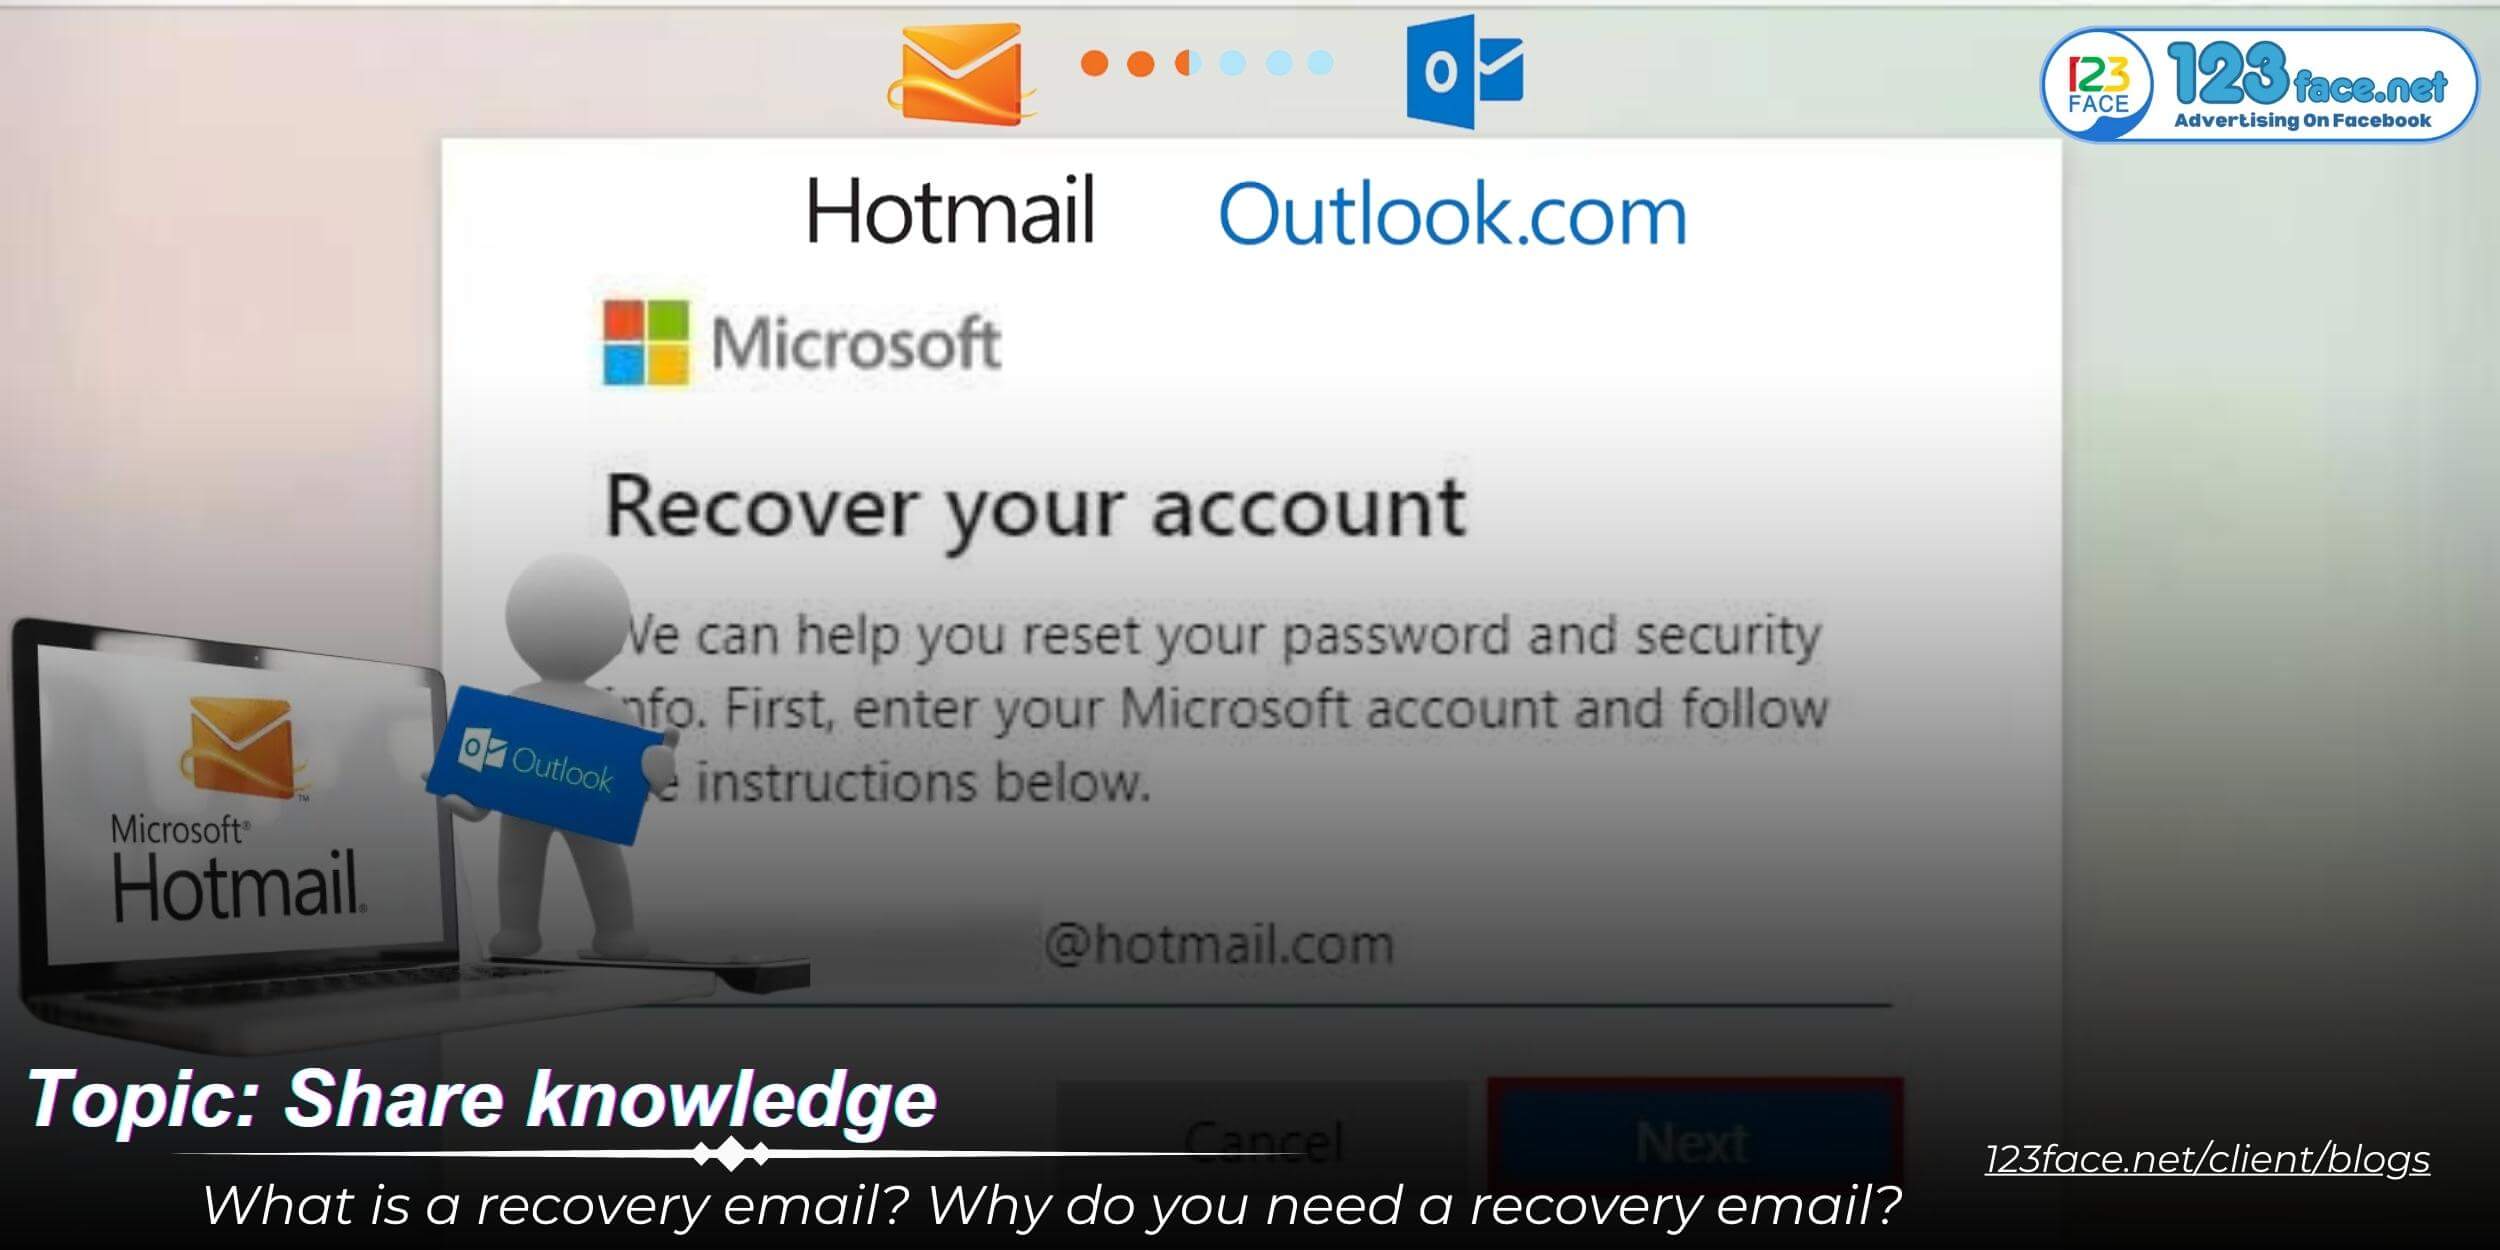 What is a recovery email? Why do you need a recovery email?